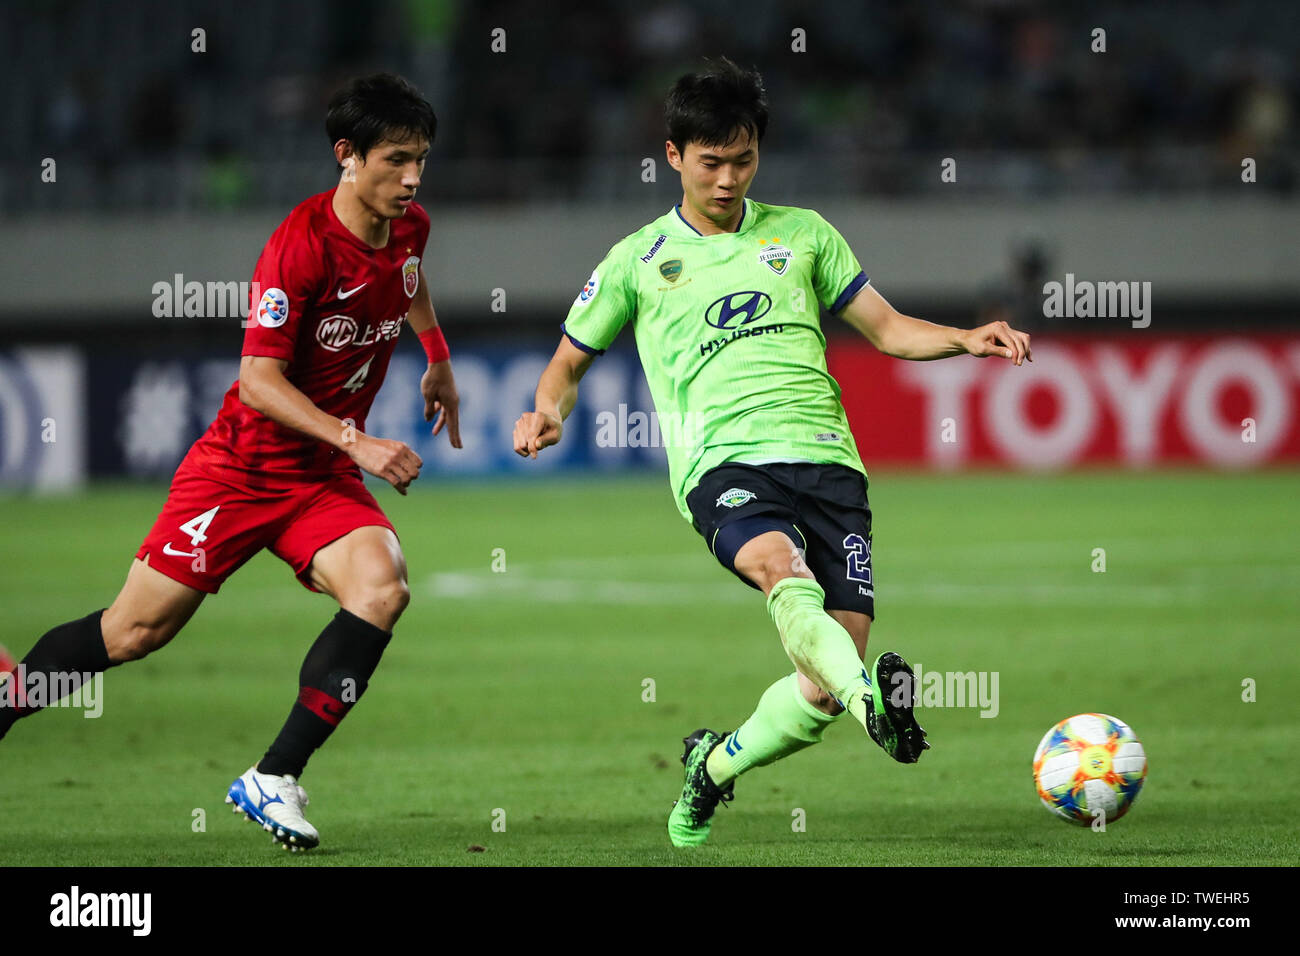 Kim Jin-su, right, of South Korea's Jeonbuk Hyundai Motors FC passes the ball against Wang Shenchao of Shanghai SIPG in the eighth-final match during the 2019 AFC Champions League in Shanghai, China, 19 June 2019. Two-time champions Jeonbuk Hyundai Motors will take an advantage into the second leg of their 2019 AFC Champions League (ACL) Round of 16 game with Shanghai SIPG FC next week after netting an away goal in their 1-1 draw in Shanghai on Wednesday. Stock Photo